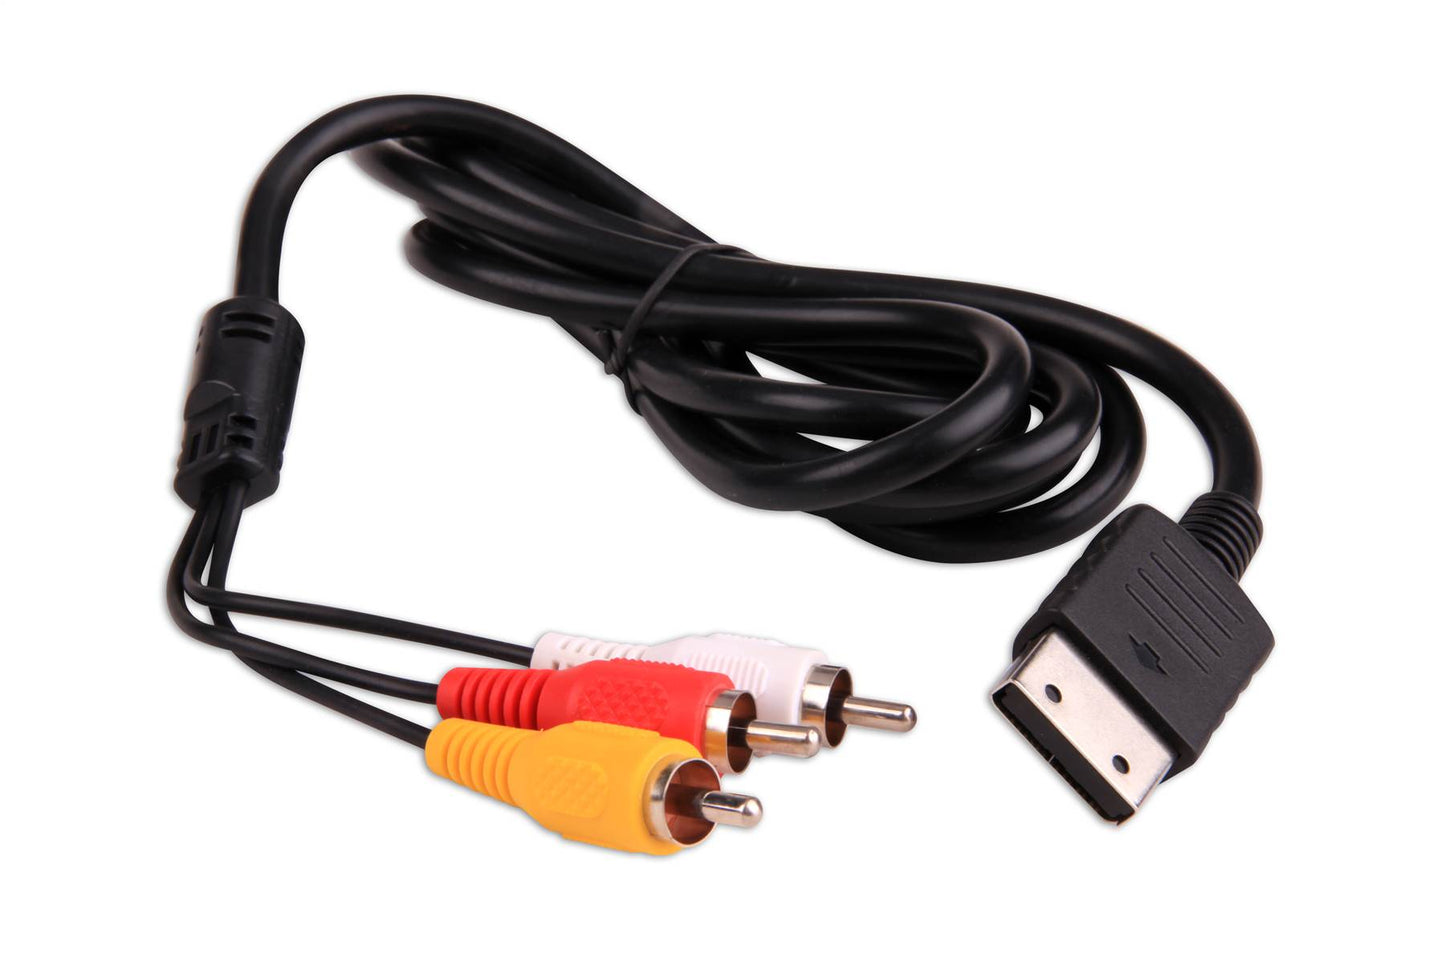 Dreamcast - Third Party AV Cable